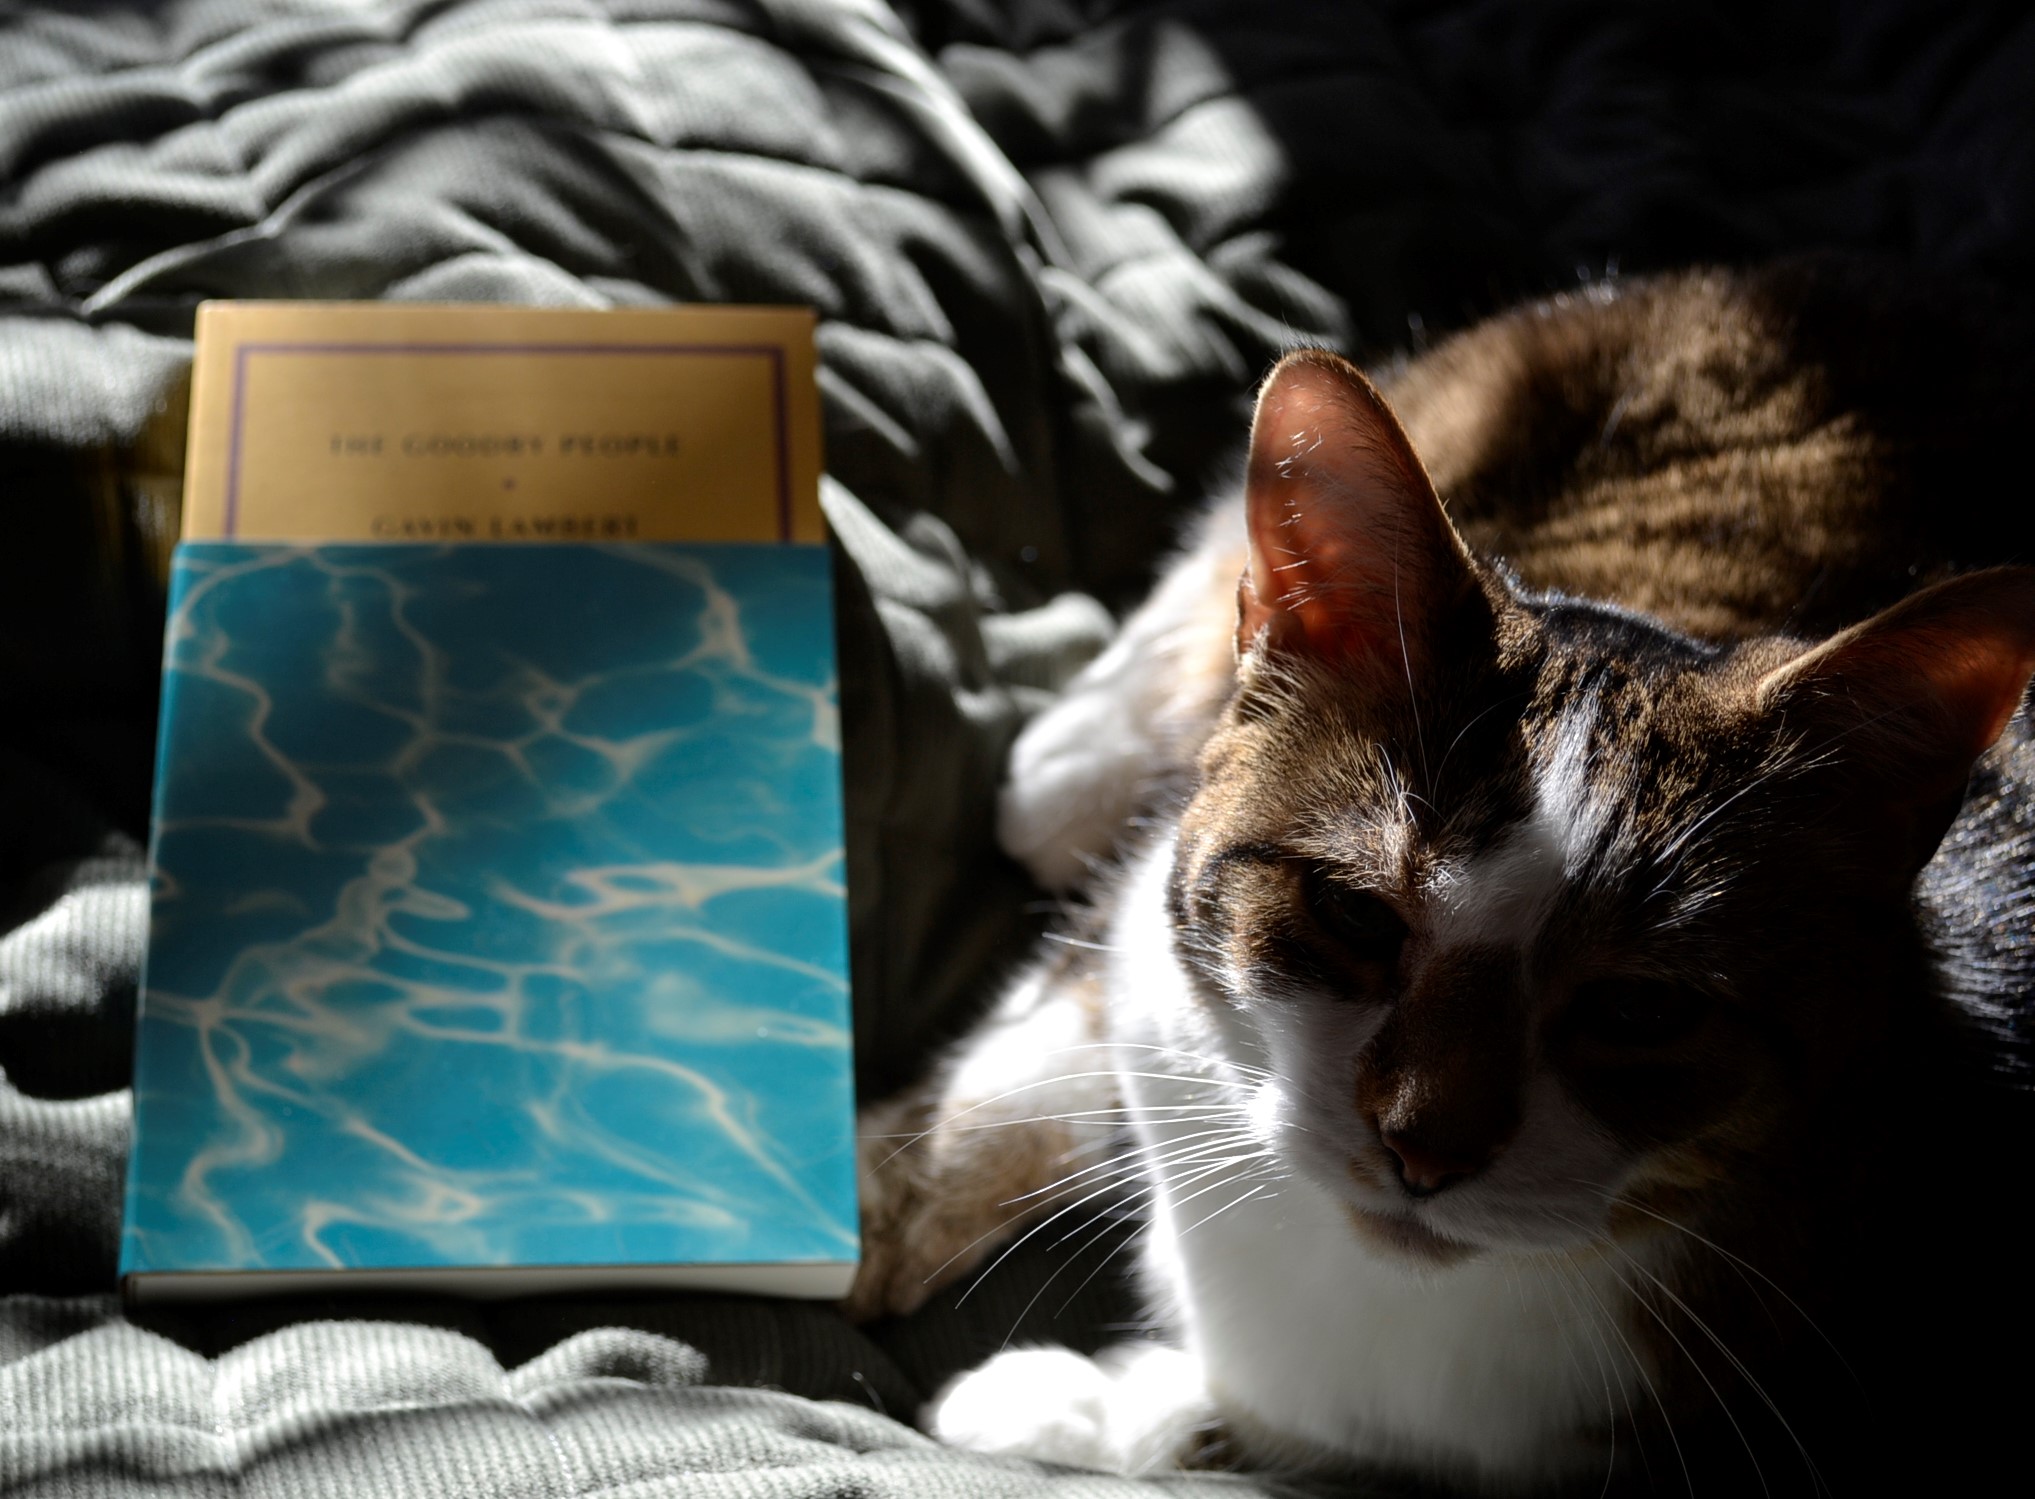 In deep shadows, a tabby cat lounges. Beside her, in a beam of light, is a yellow book with an aqua-blue dust jacket.